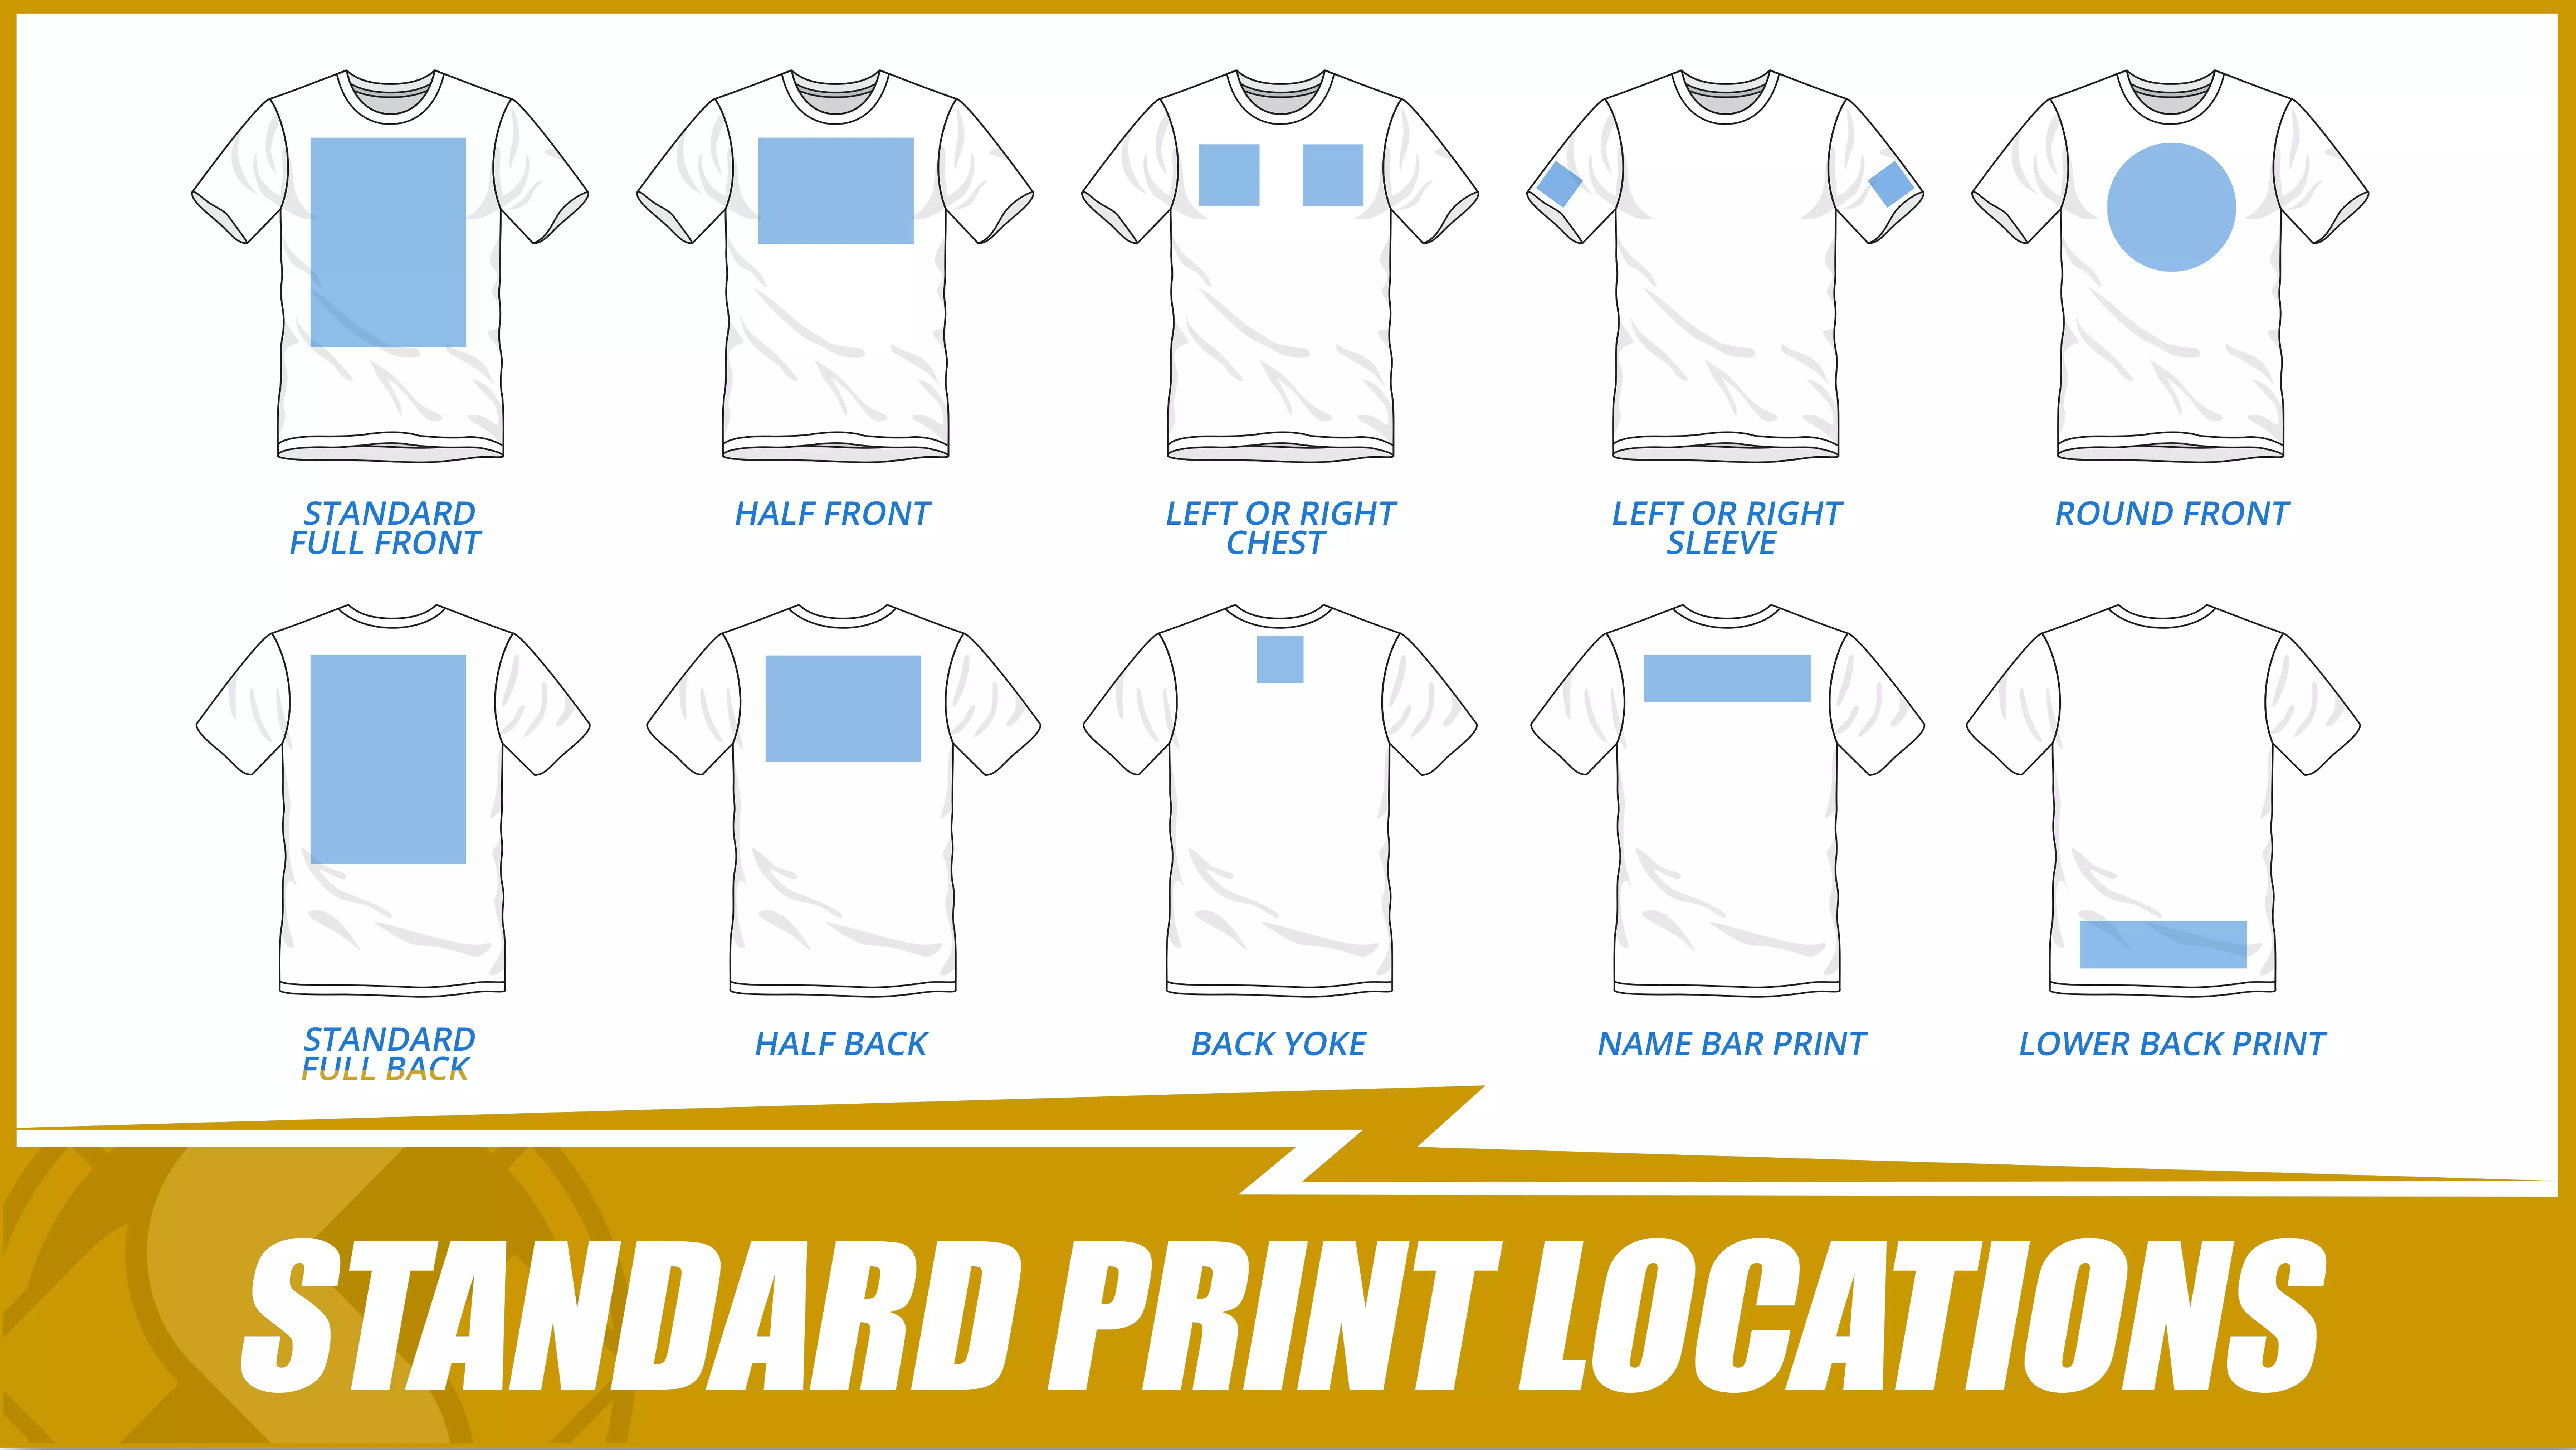 Get quality screen printing services from the best company